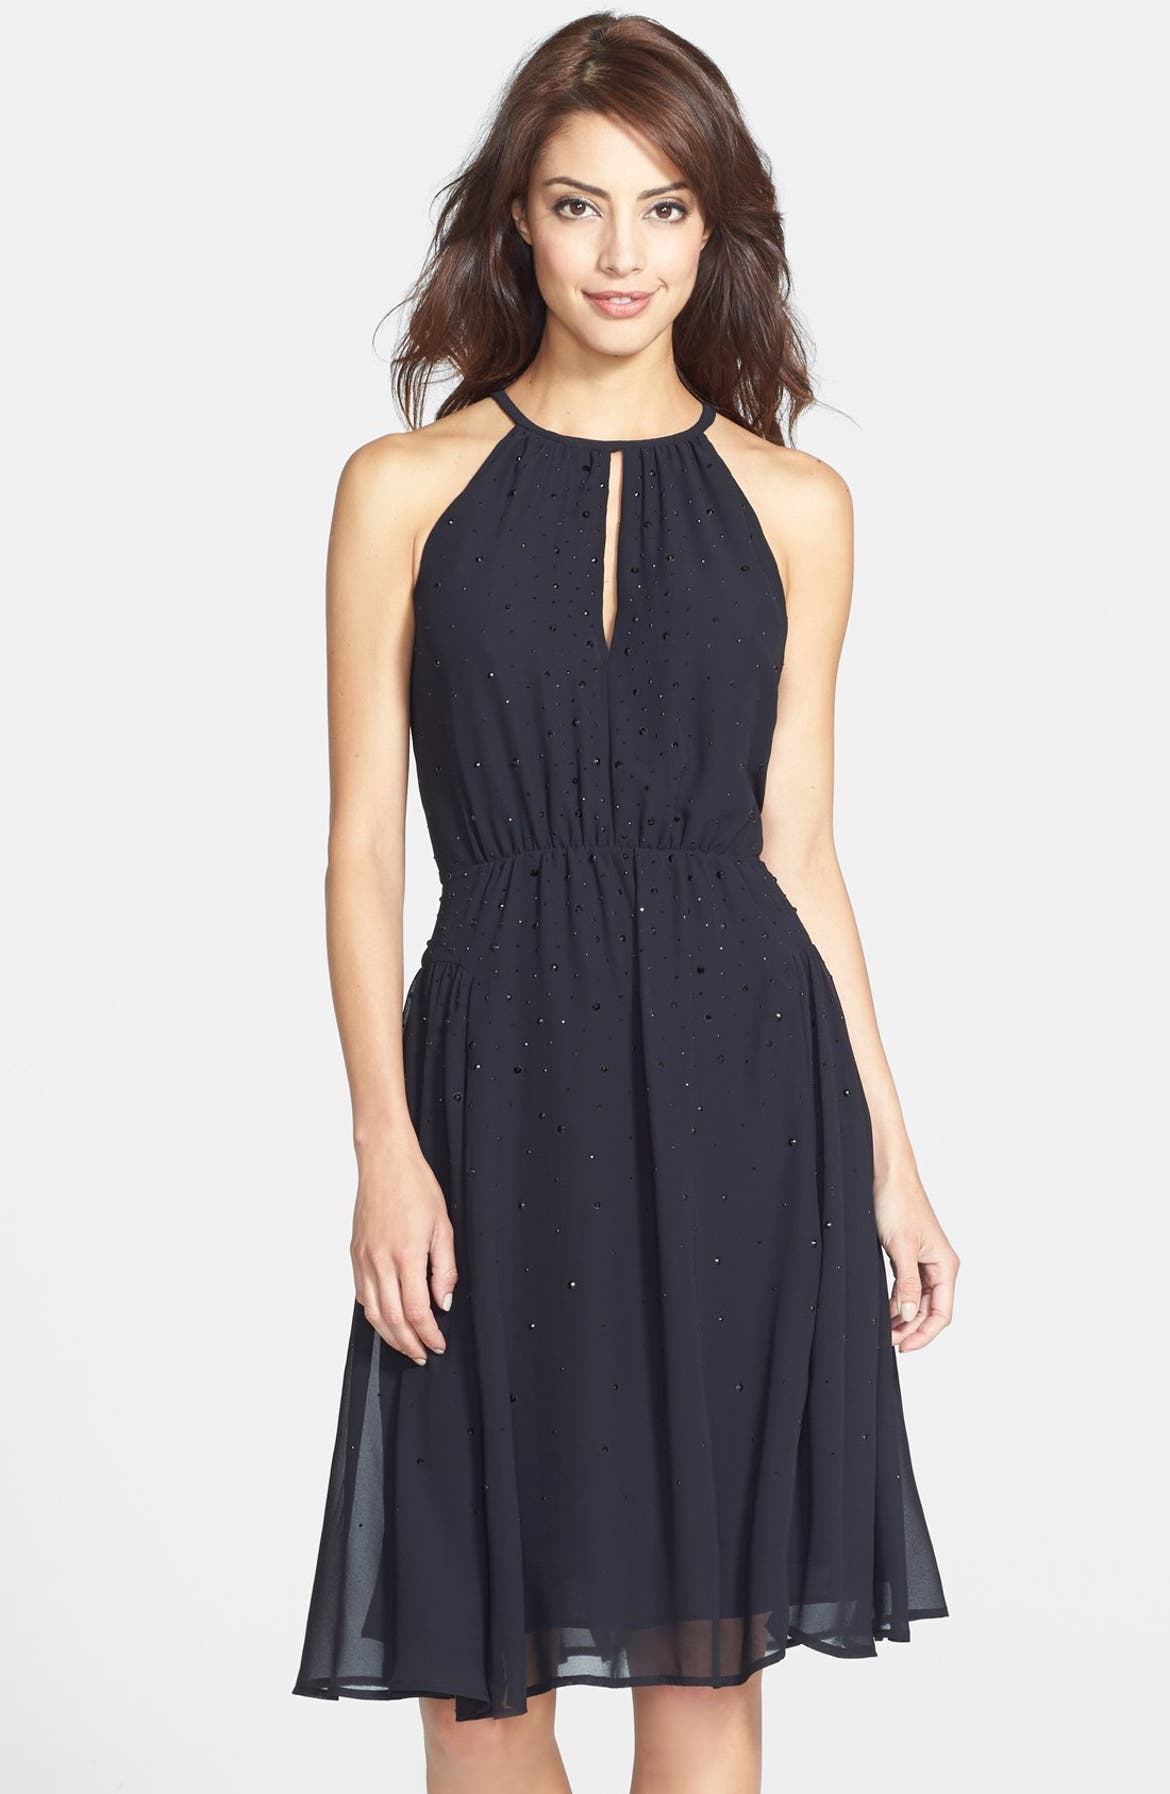 French Connection 'Glitter Spells' Embellished Chiffon Dress | Nordstrom